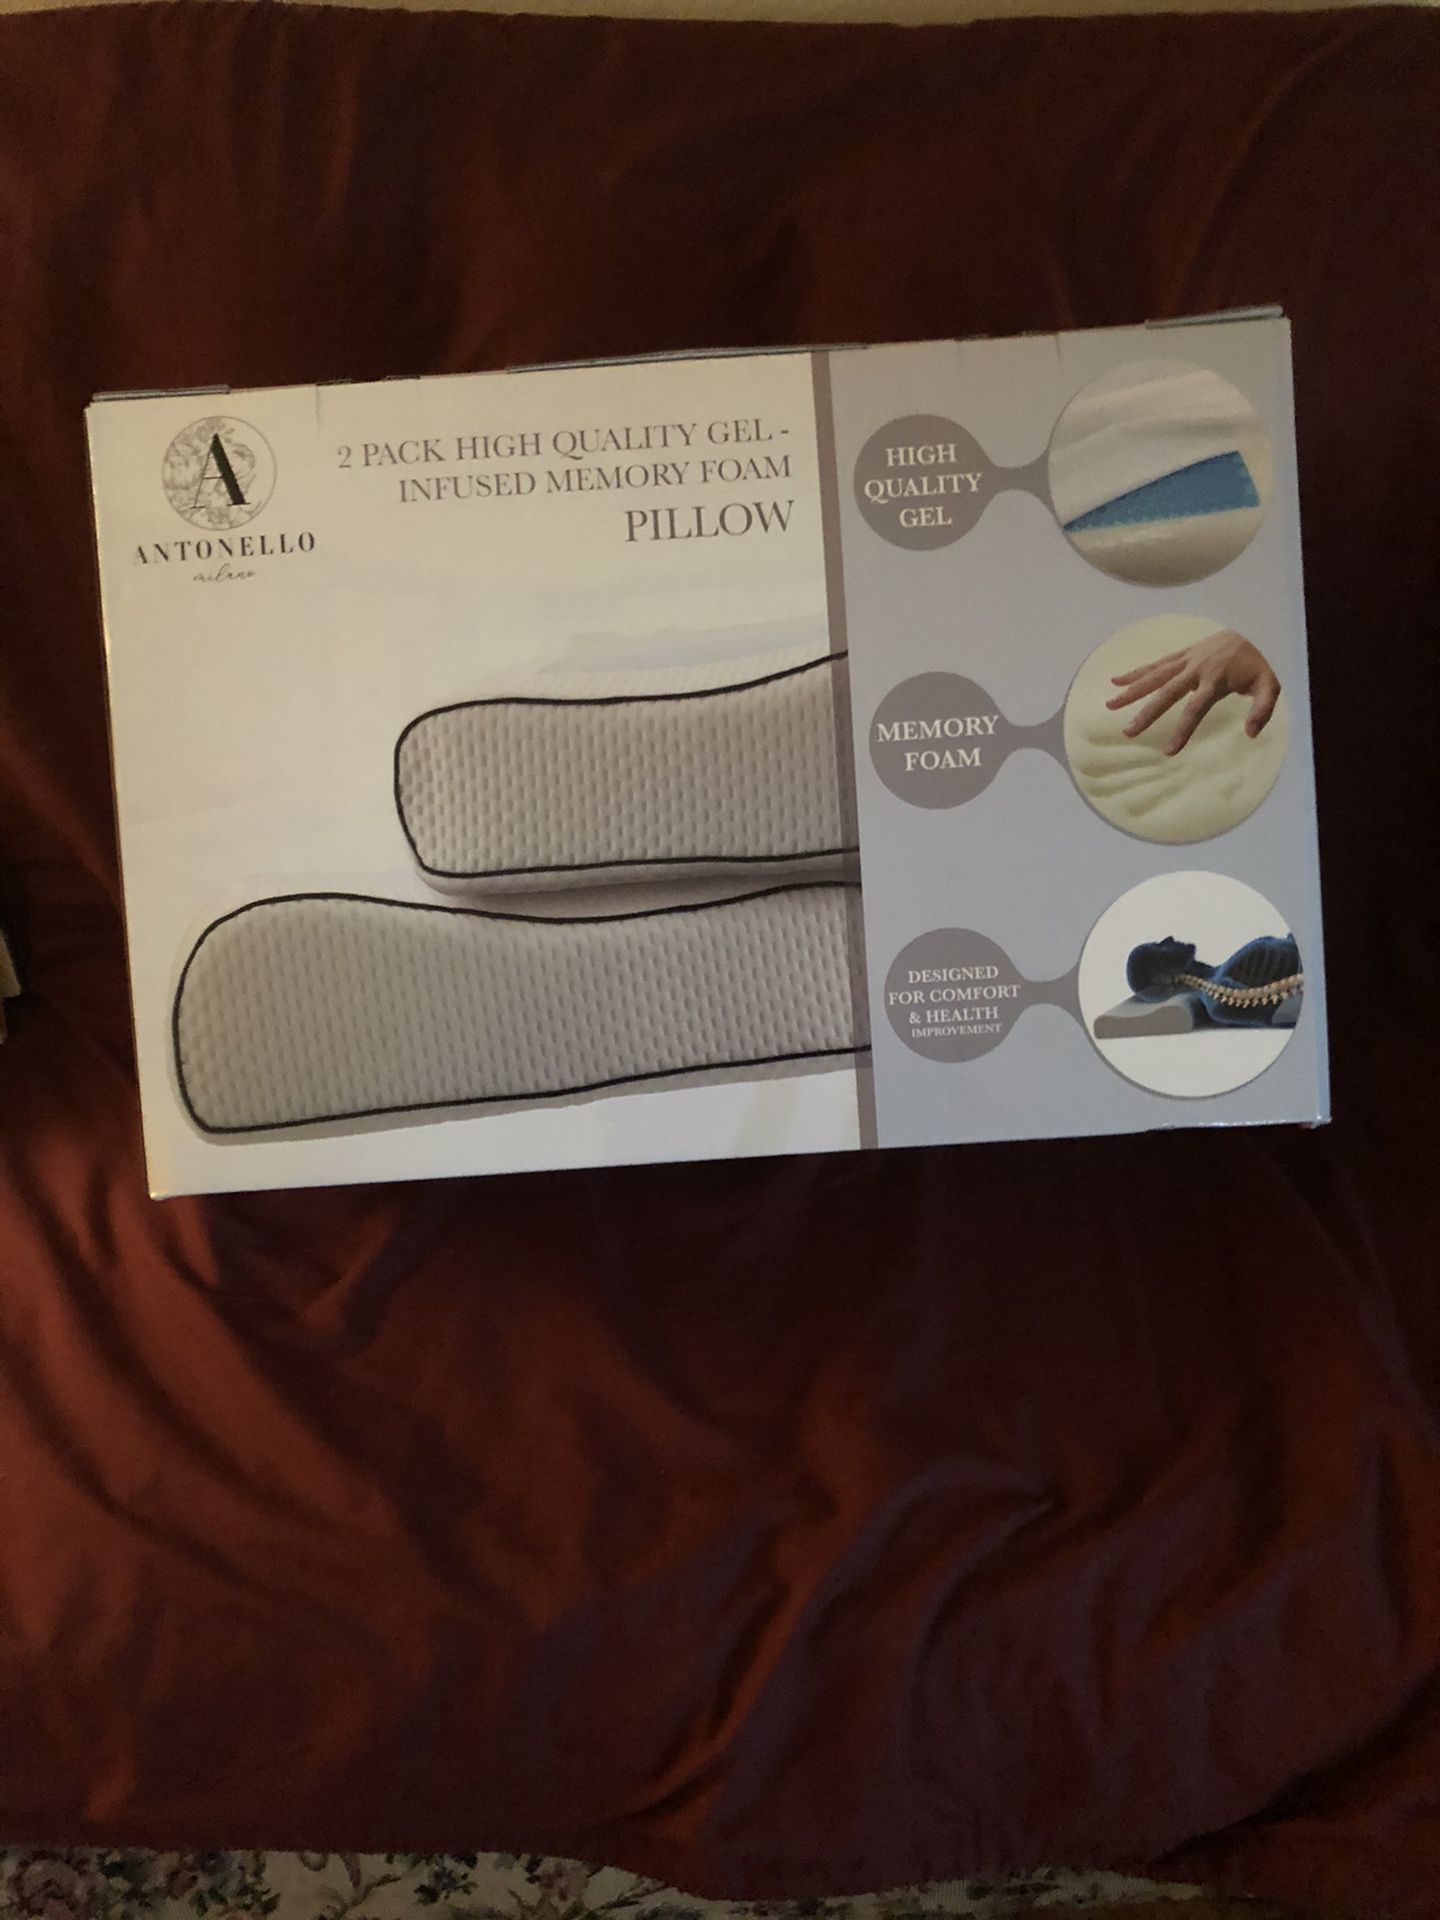 Antonello 2 pack high quality gel infused memory foam pillow NEW